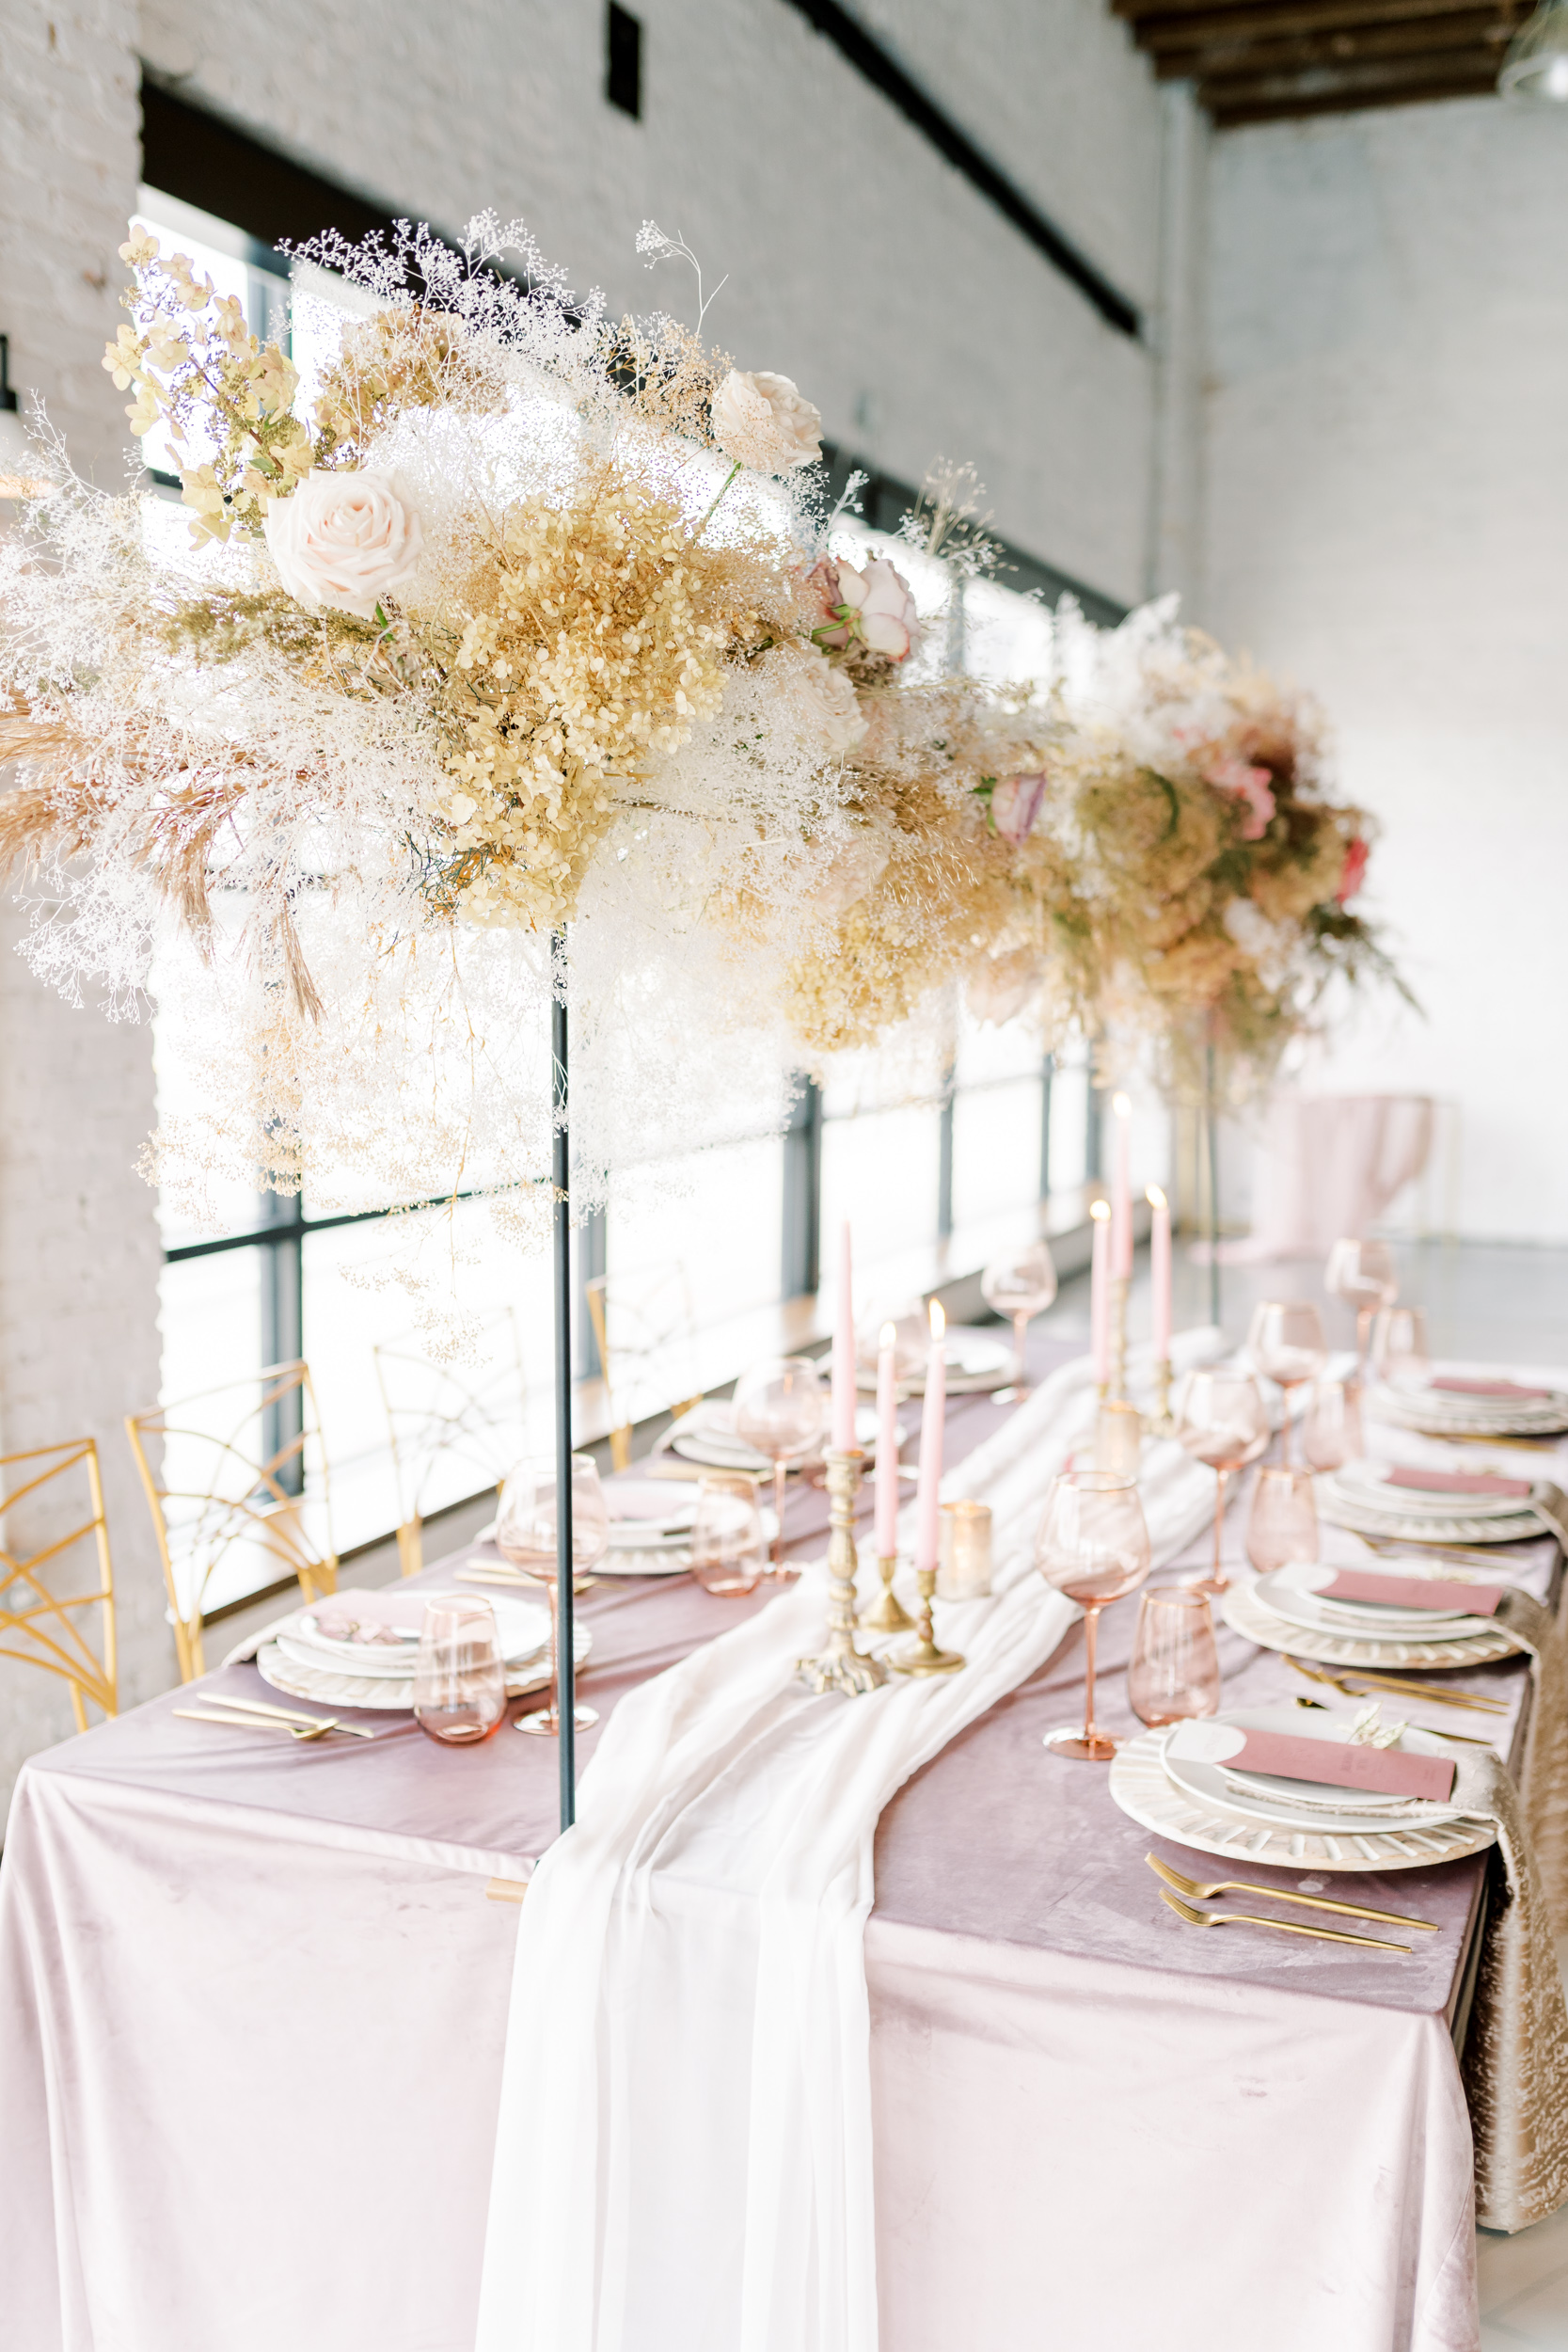 Tampa Bay Wedding Planner | Stephany Perry Events